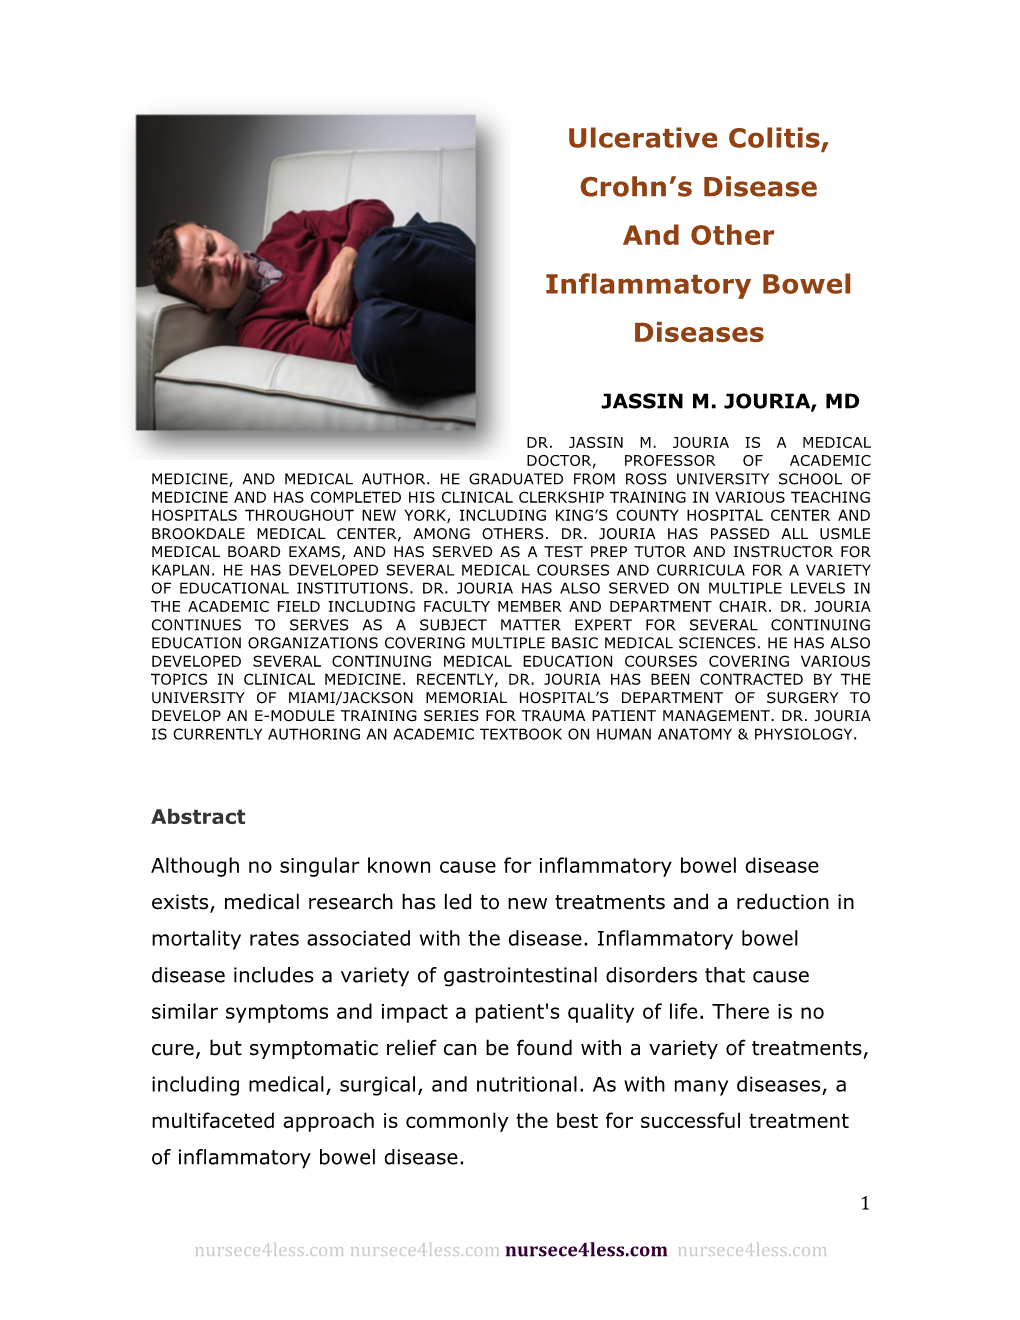 Ulcerative Colitis, Crohn's Disease and Other Inflammatory Bowel